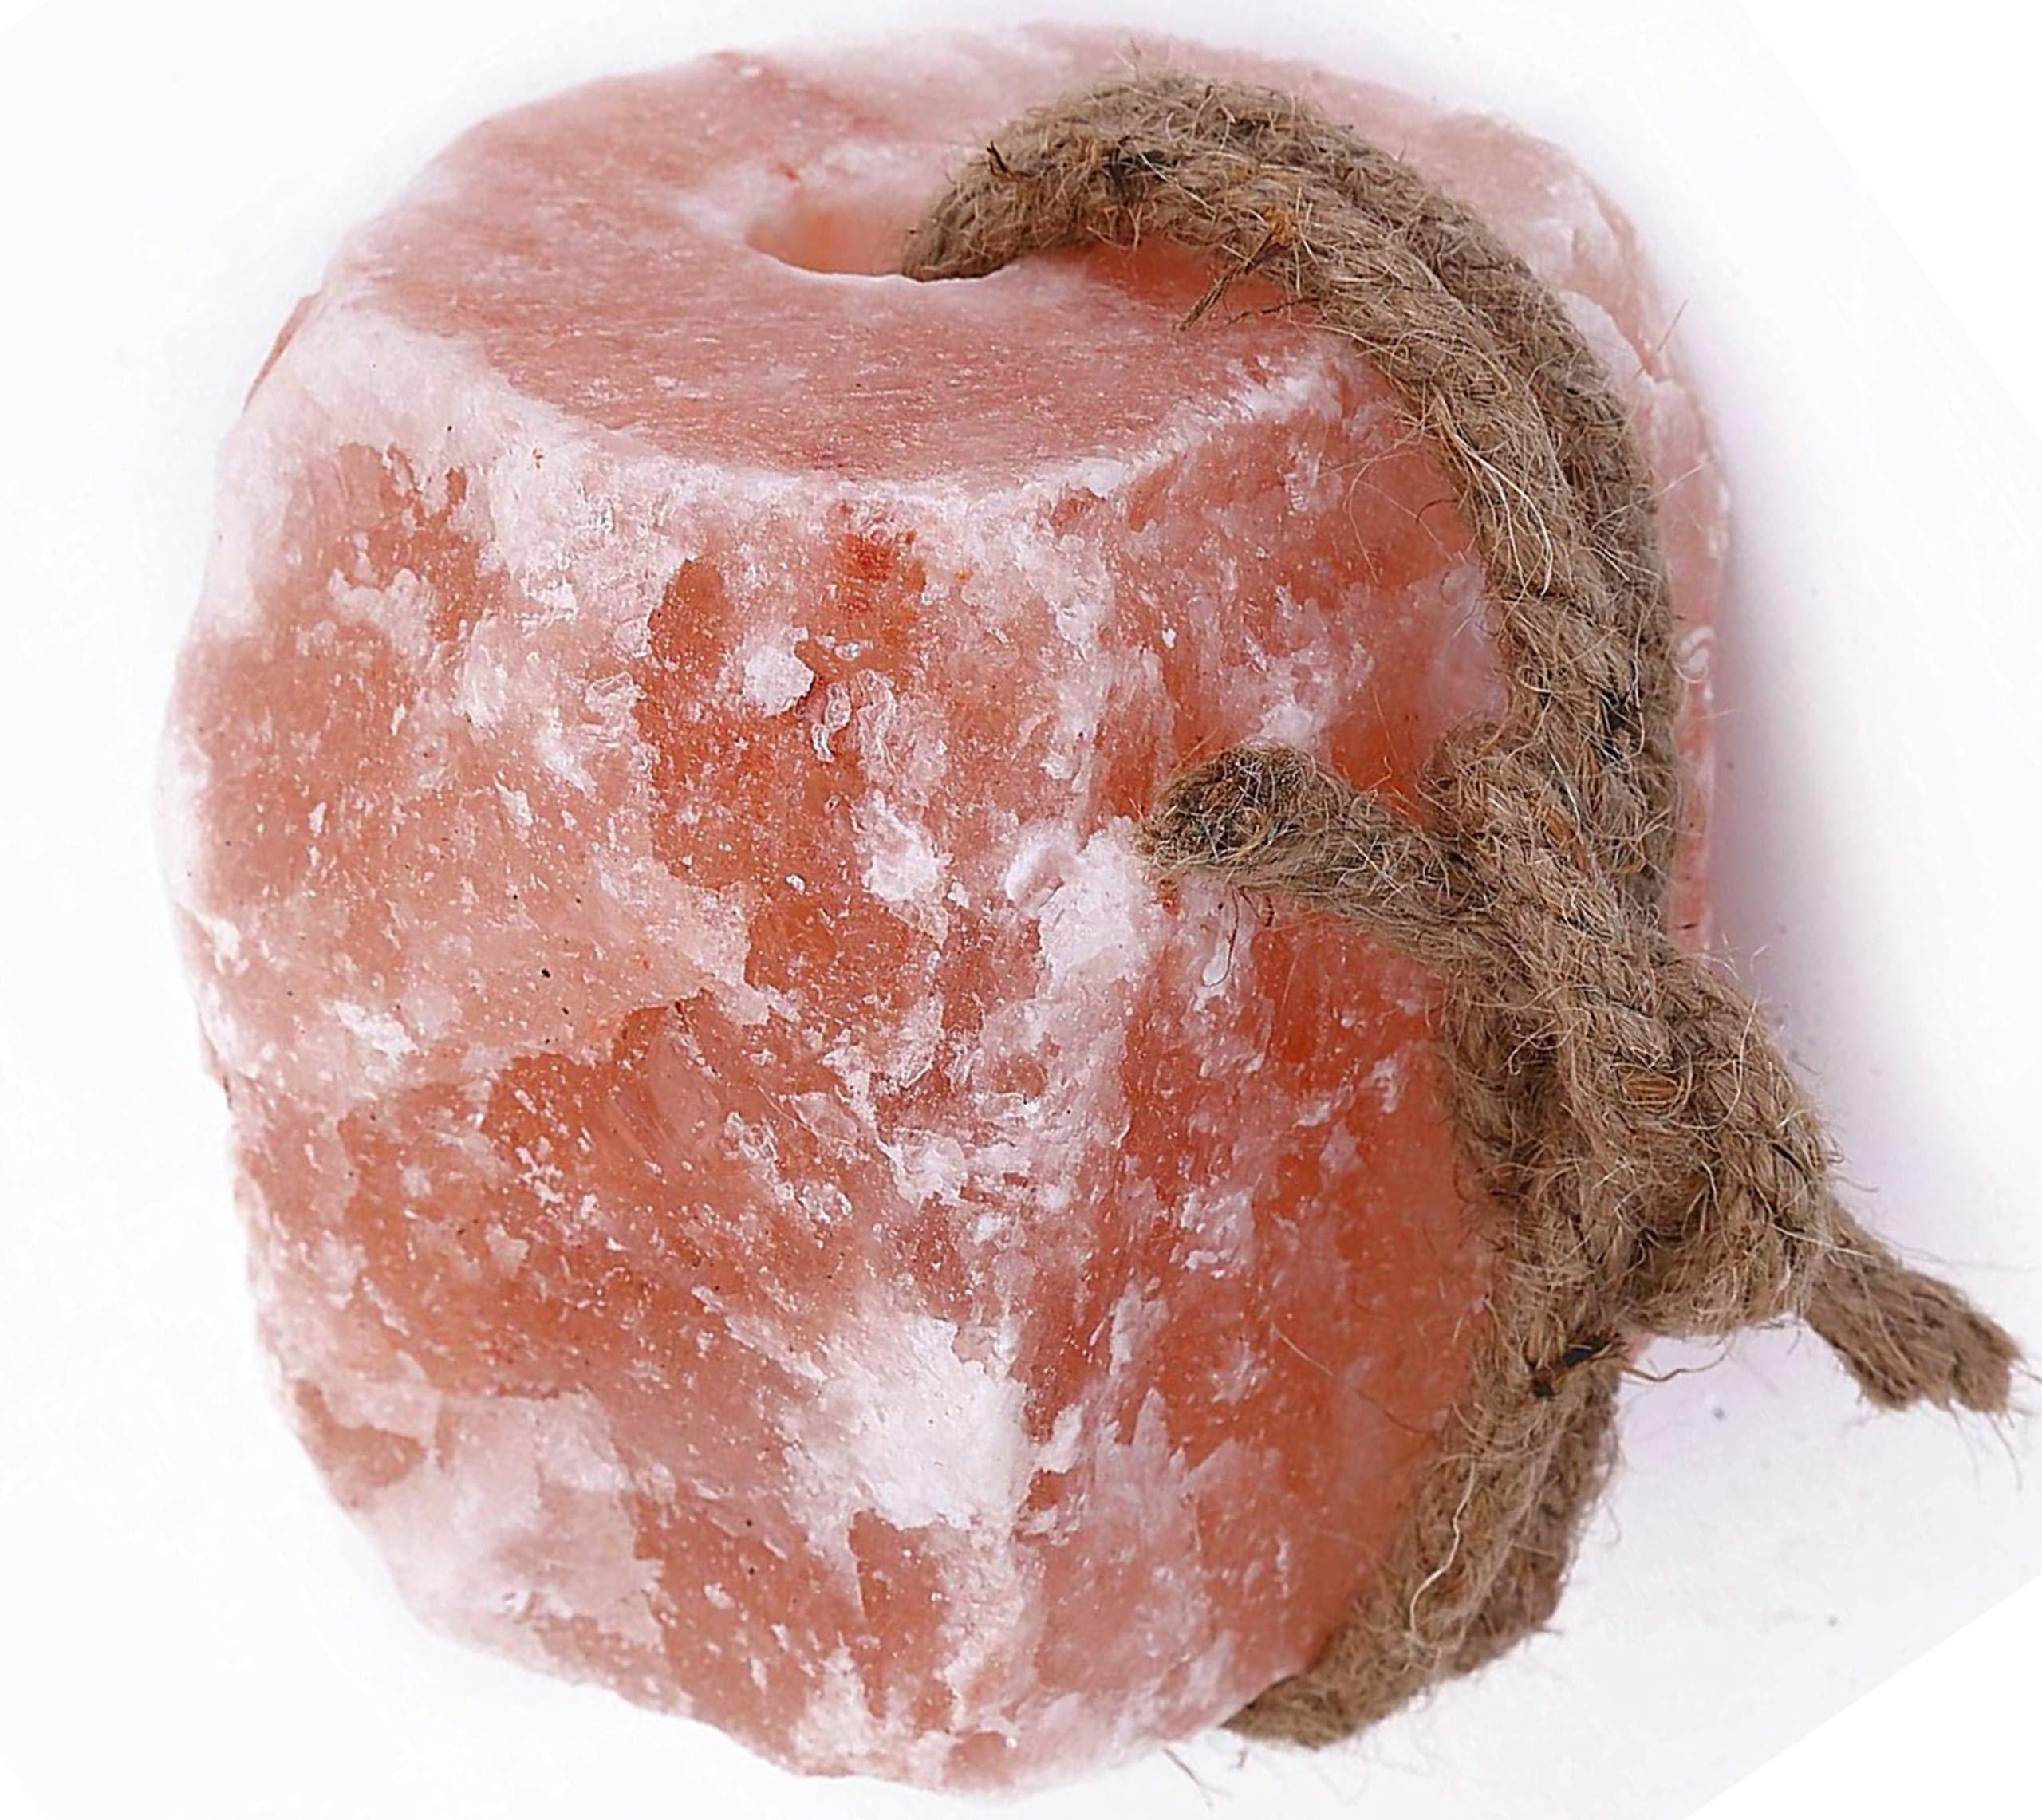 Himalayan Mineral Salt Lick (2-4 lbs on a Rope 100% Natural Product | Salt Block for Horses, Deer, Goats, Cattle, Rabbits | Vermont Salt & Stone (2-4 lbs on a Rope)